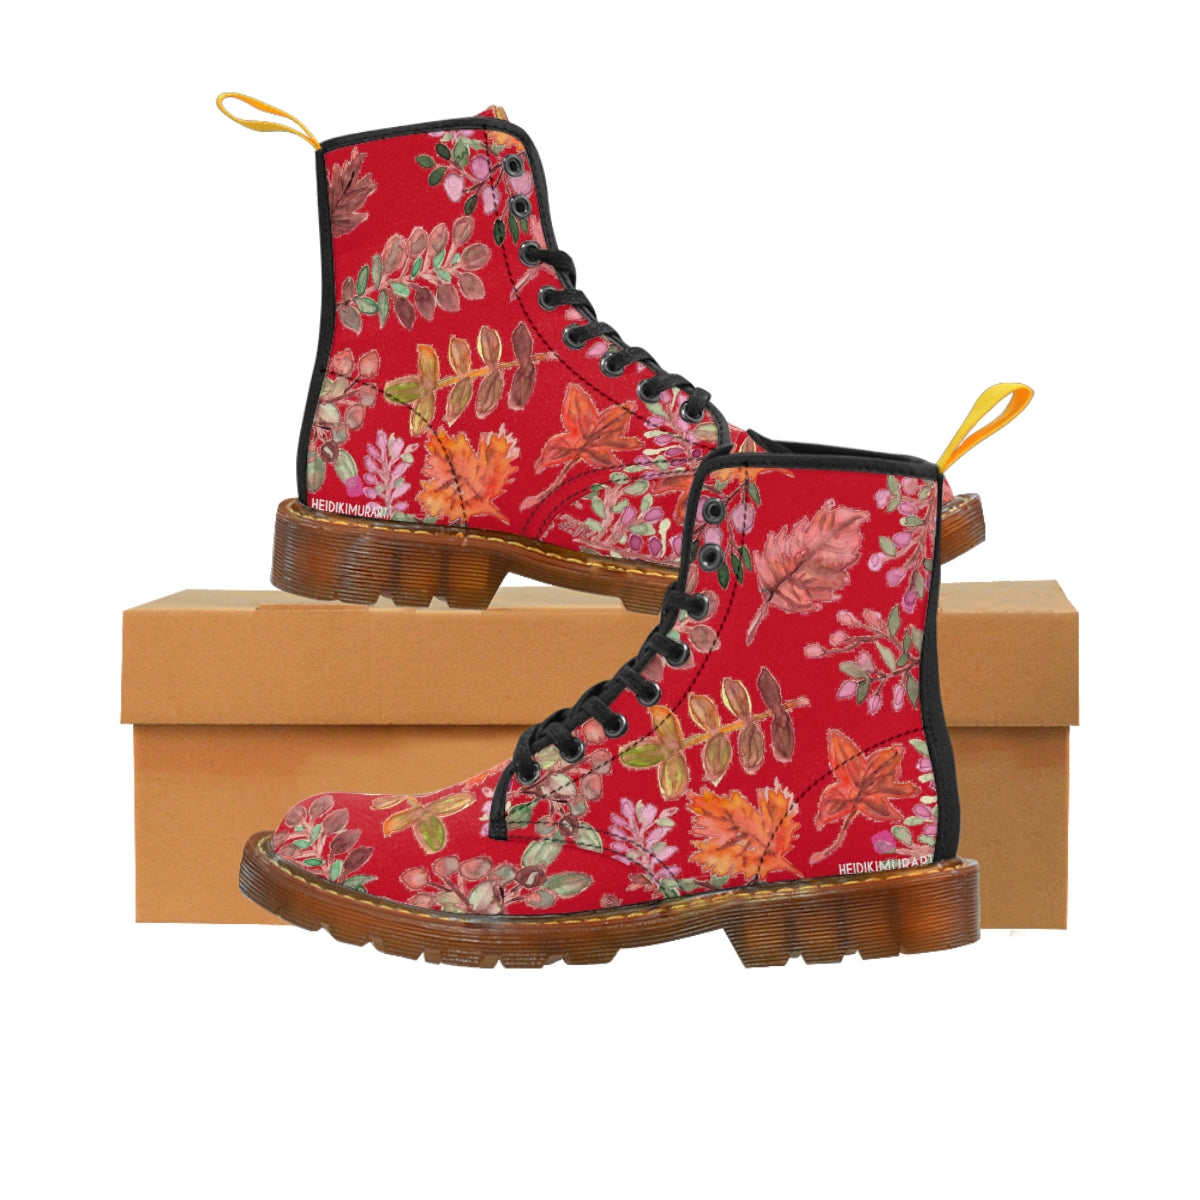 Red Fall Leaves Print Women's Boots, Red Autumn Fall Leaves Print Women's Boots, Combat Boots, Designer Women's Winter Lace-up Toe Cap Hiking Boots Shoes For Women (US Size 6.5-11) Fall Leaves Fashion Canvas Shoes, Fall Leaves Print Winter Boots, Autumn Leaves Printed Boots For Ladies, Colorful Boots For Women